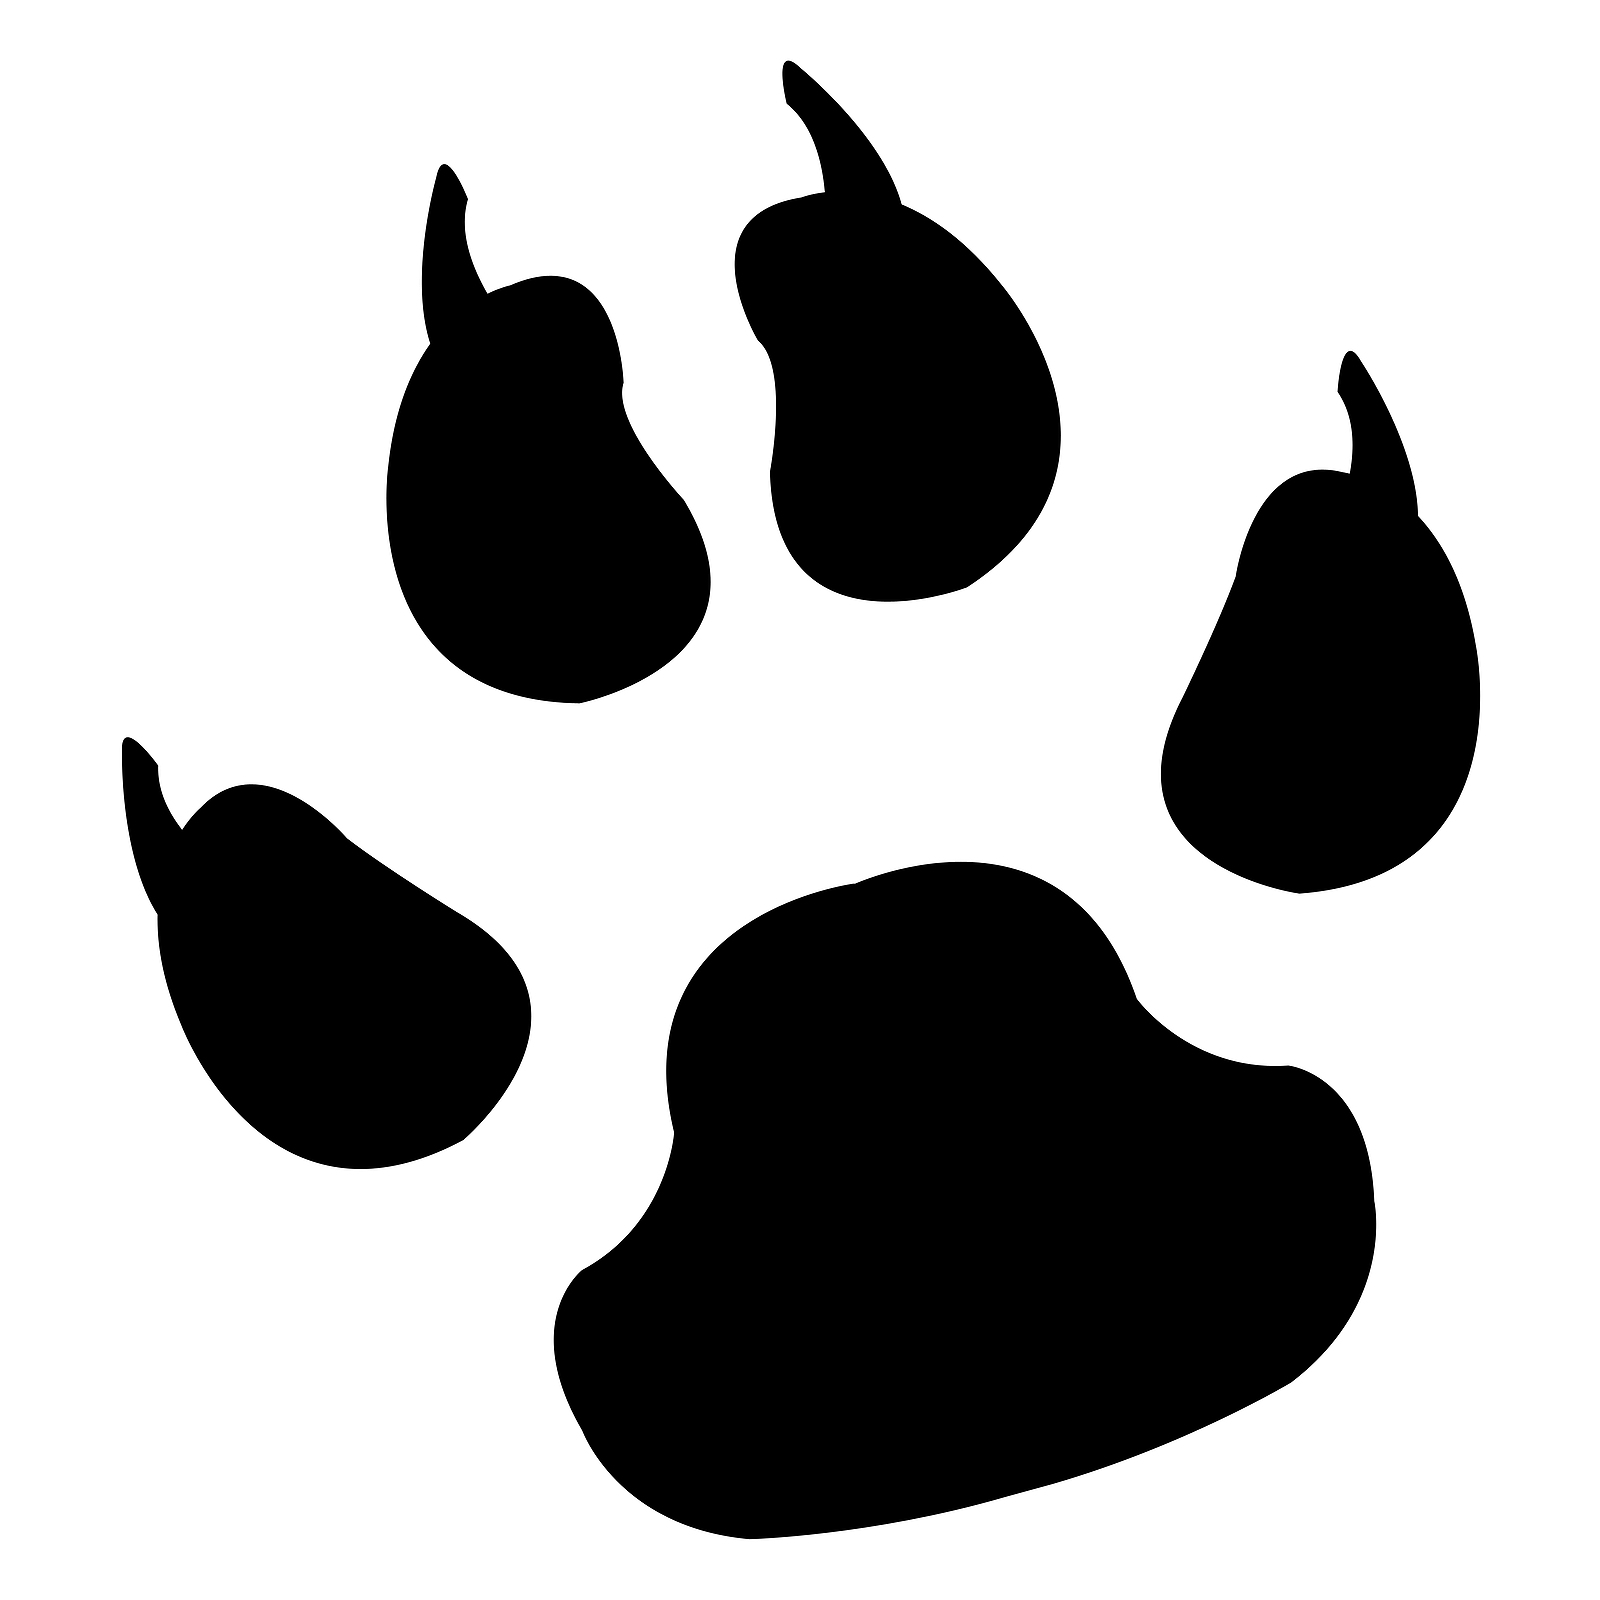 28 Dog Paw Logo Free Cliparts That You Can Download To You Computer    